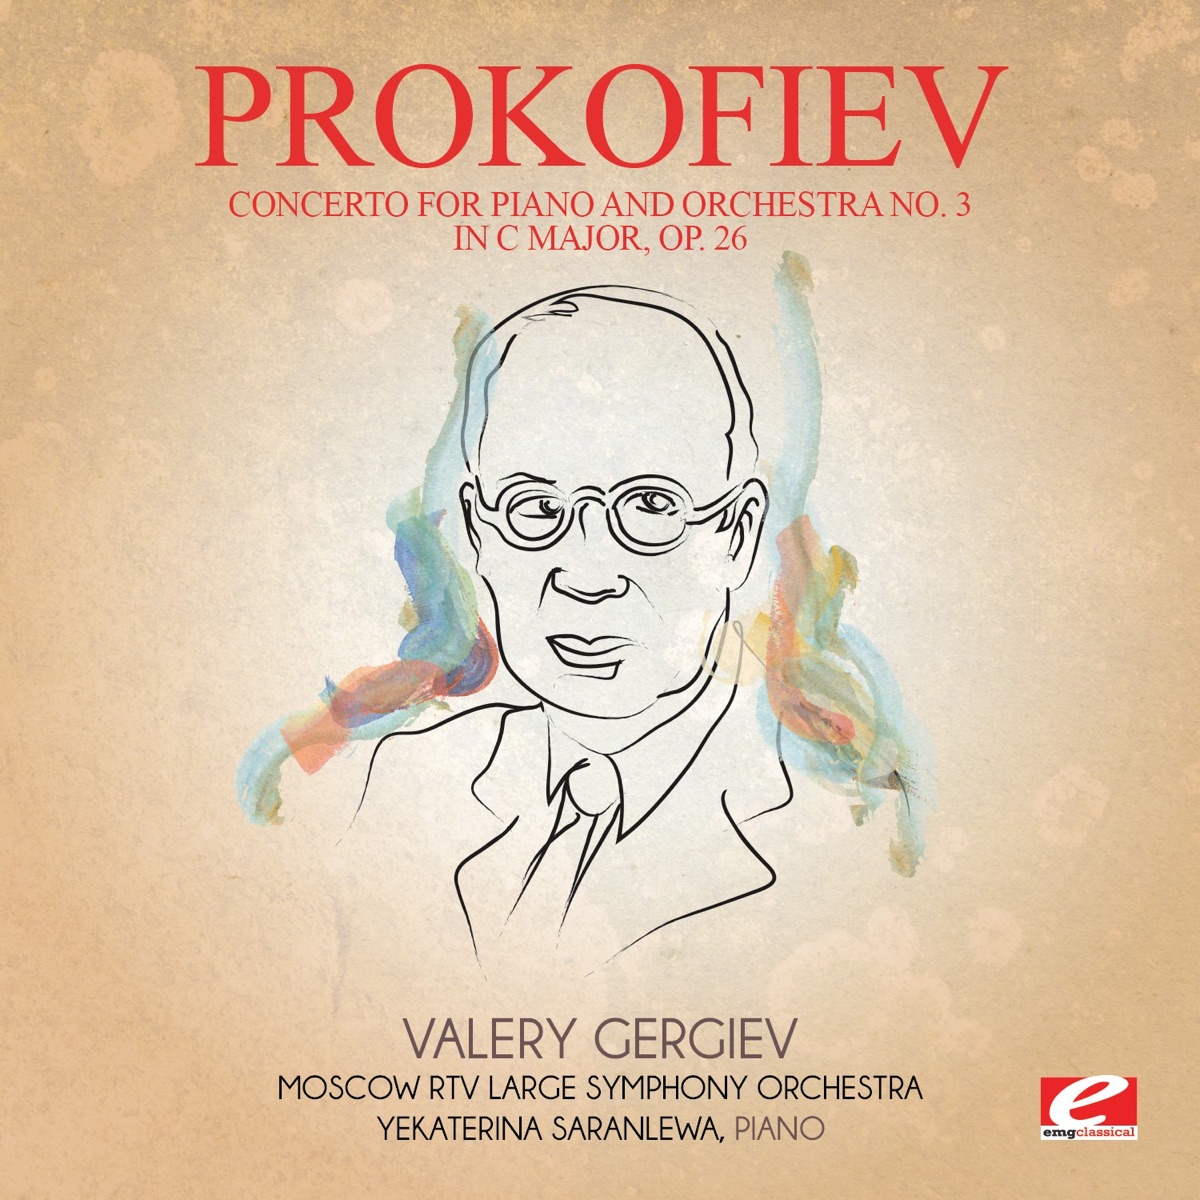 Prokofiev: Concerto for Piano and Orchestra No. 3 in C Major, Op. 26  (Remastered) - Single - Album by Moscow RTV Large Symphony Orchestra,  Yekaterina Saranlewa & Valery Gergiev - Apple Music